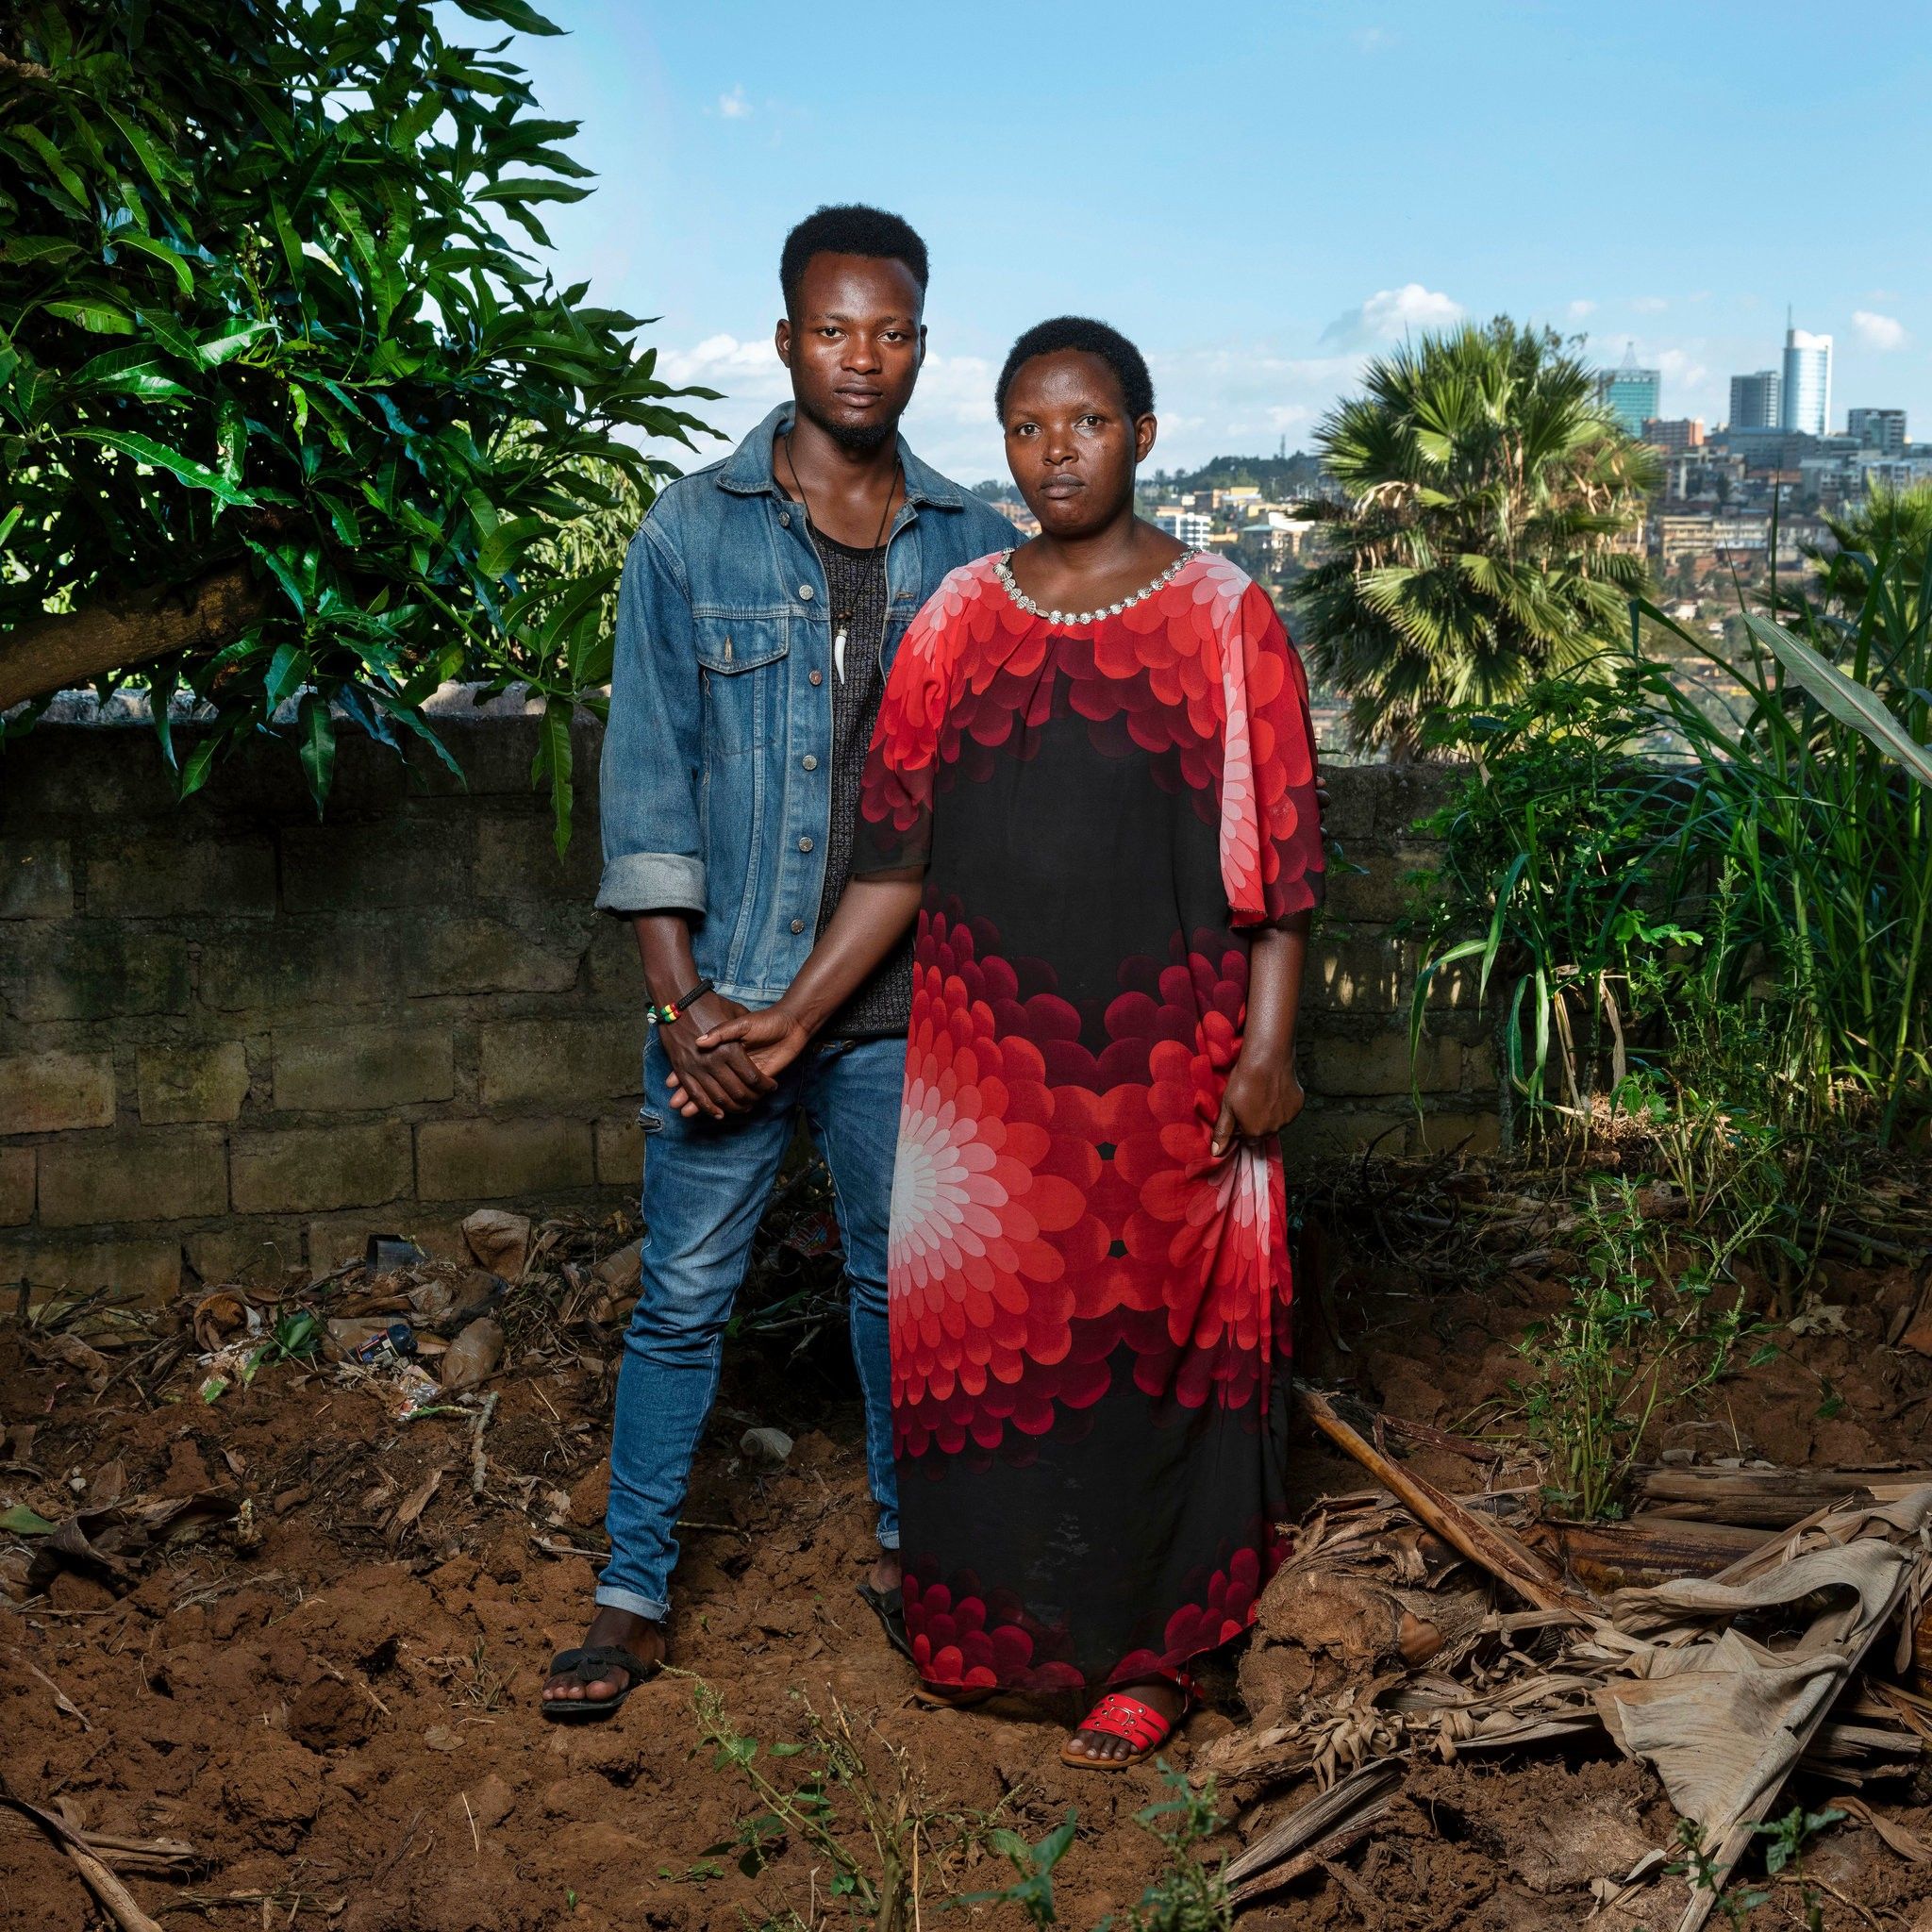 Josette, 40, and her son Thomas, 24: Josette was beaten and raped by militiamen. After the genocide, a pregnant Josette was rejected by members of her family. Thomas is now training to be a plumber. Image by Jonathan Torgovnik. Rwanda, 2018.